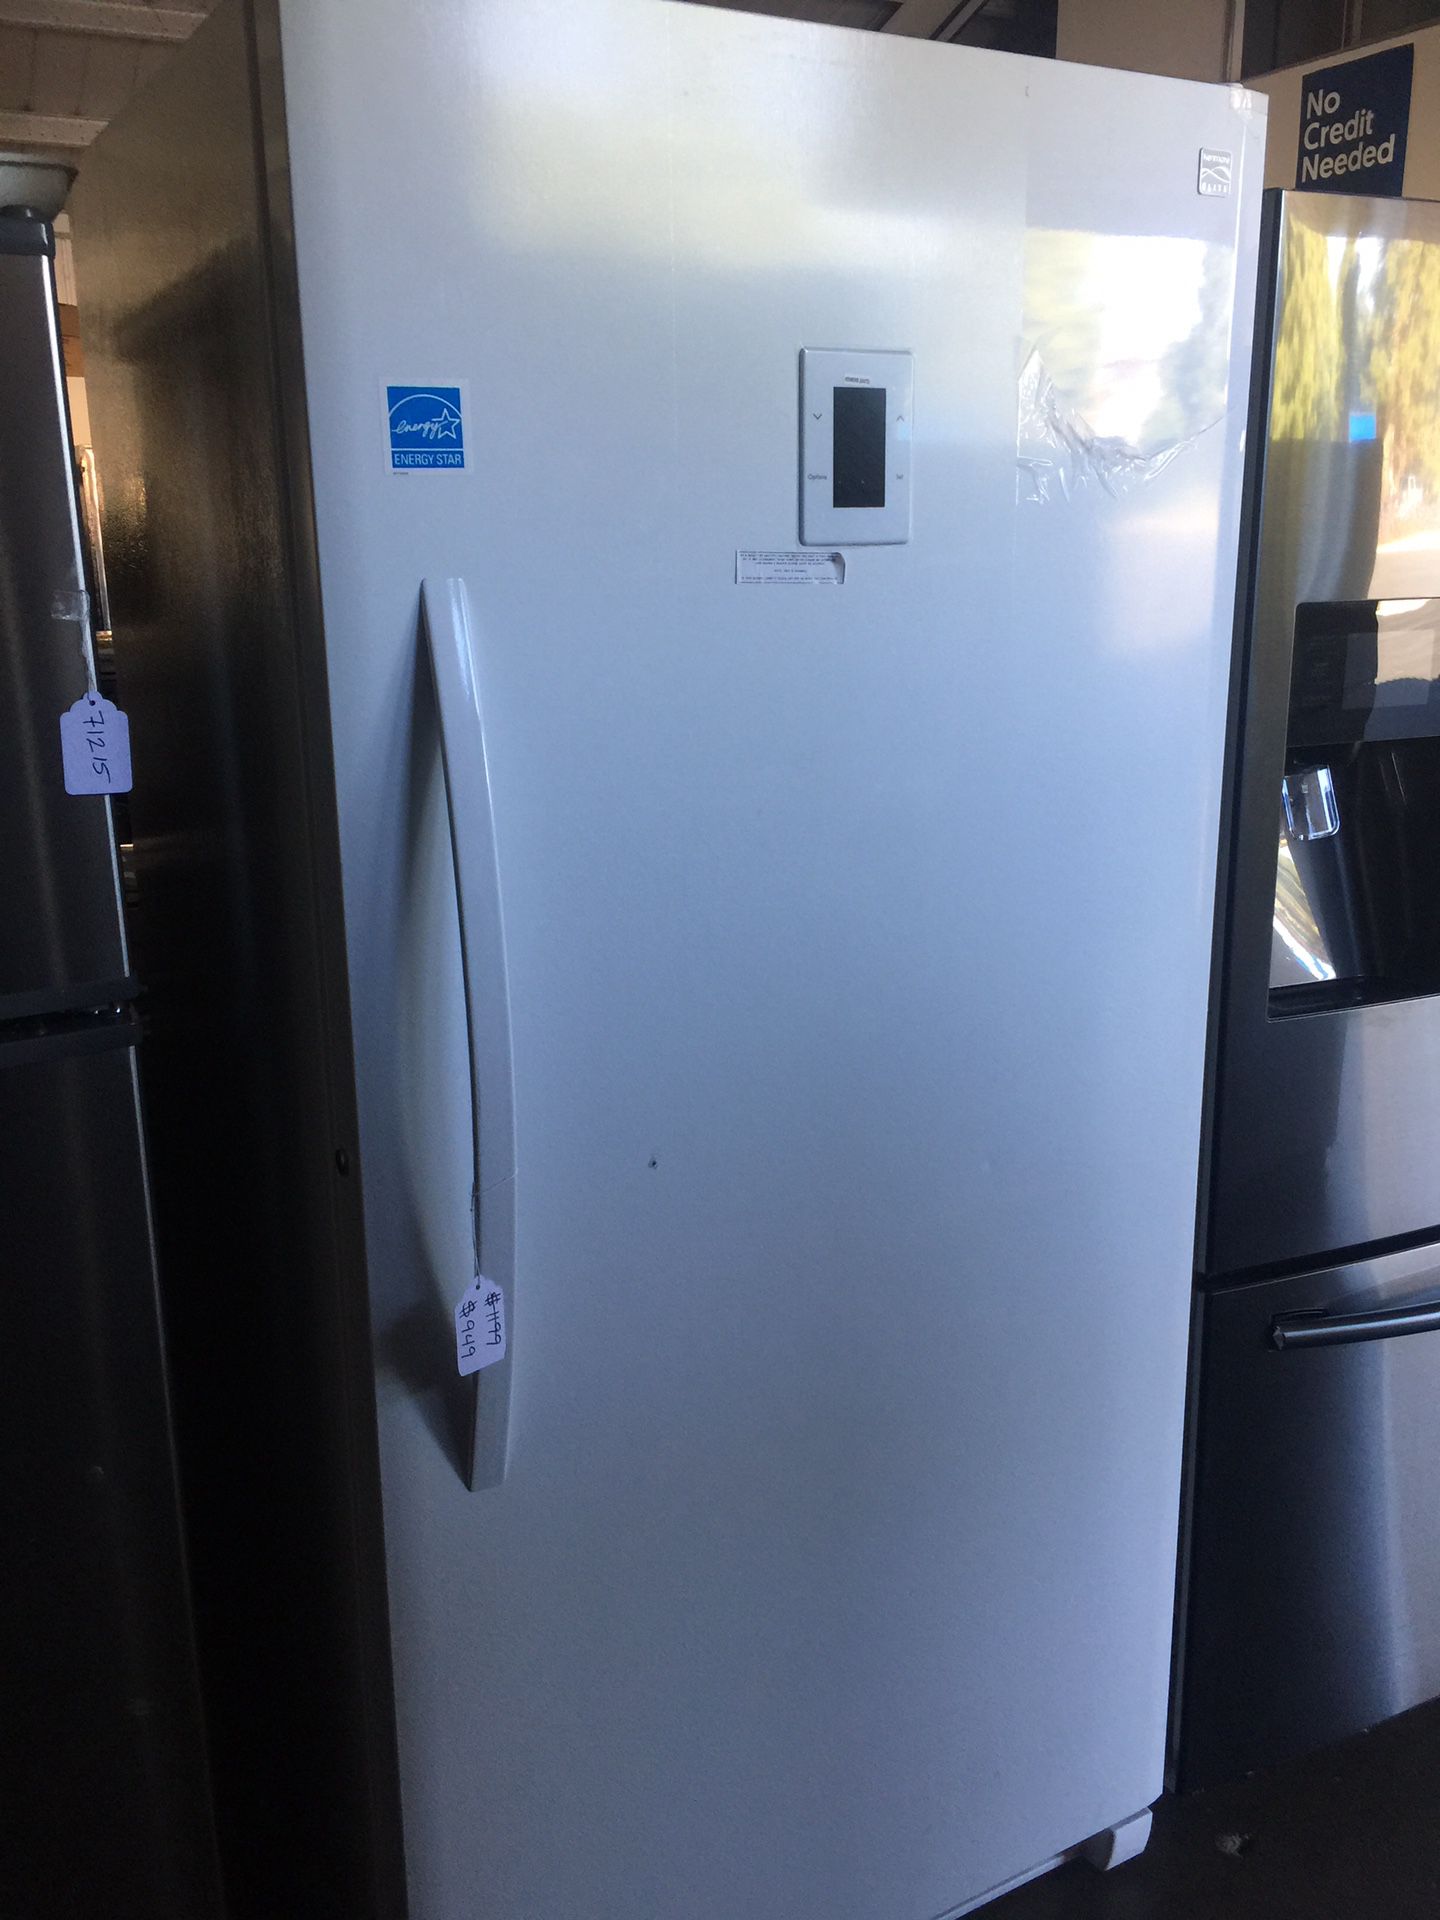 Kenmore stand up freezer